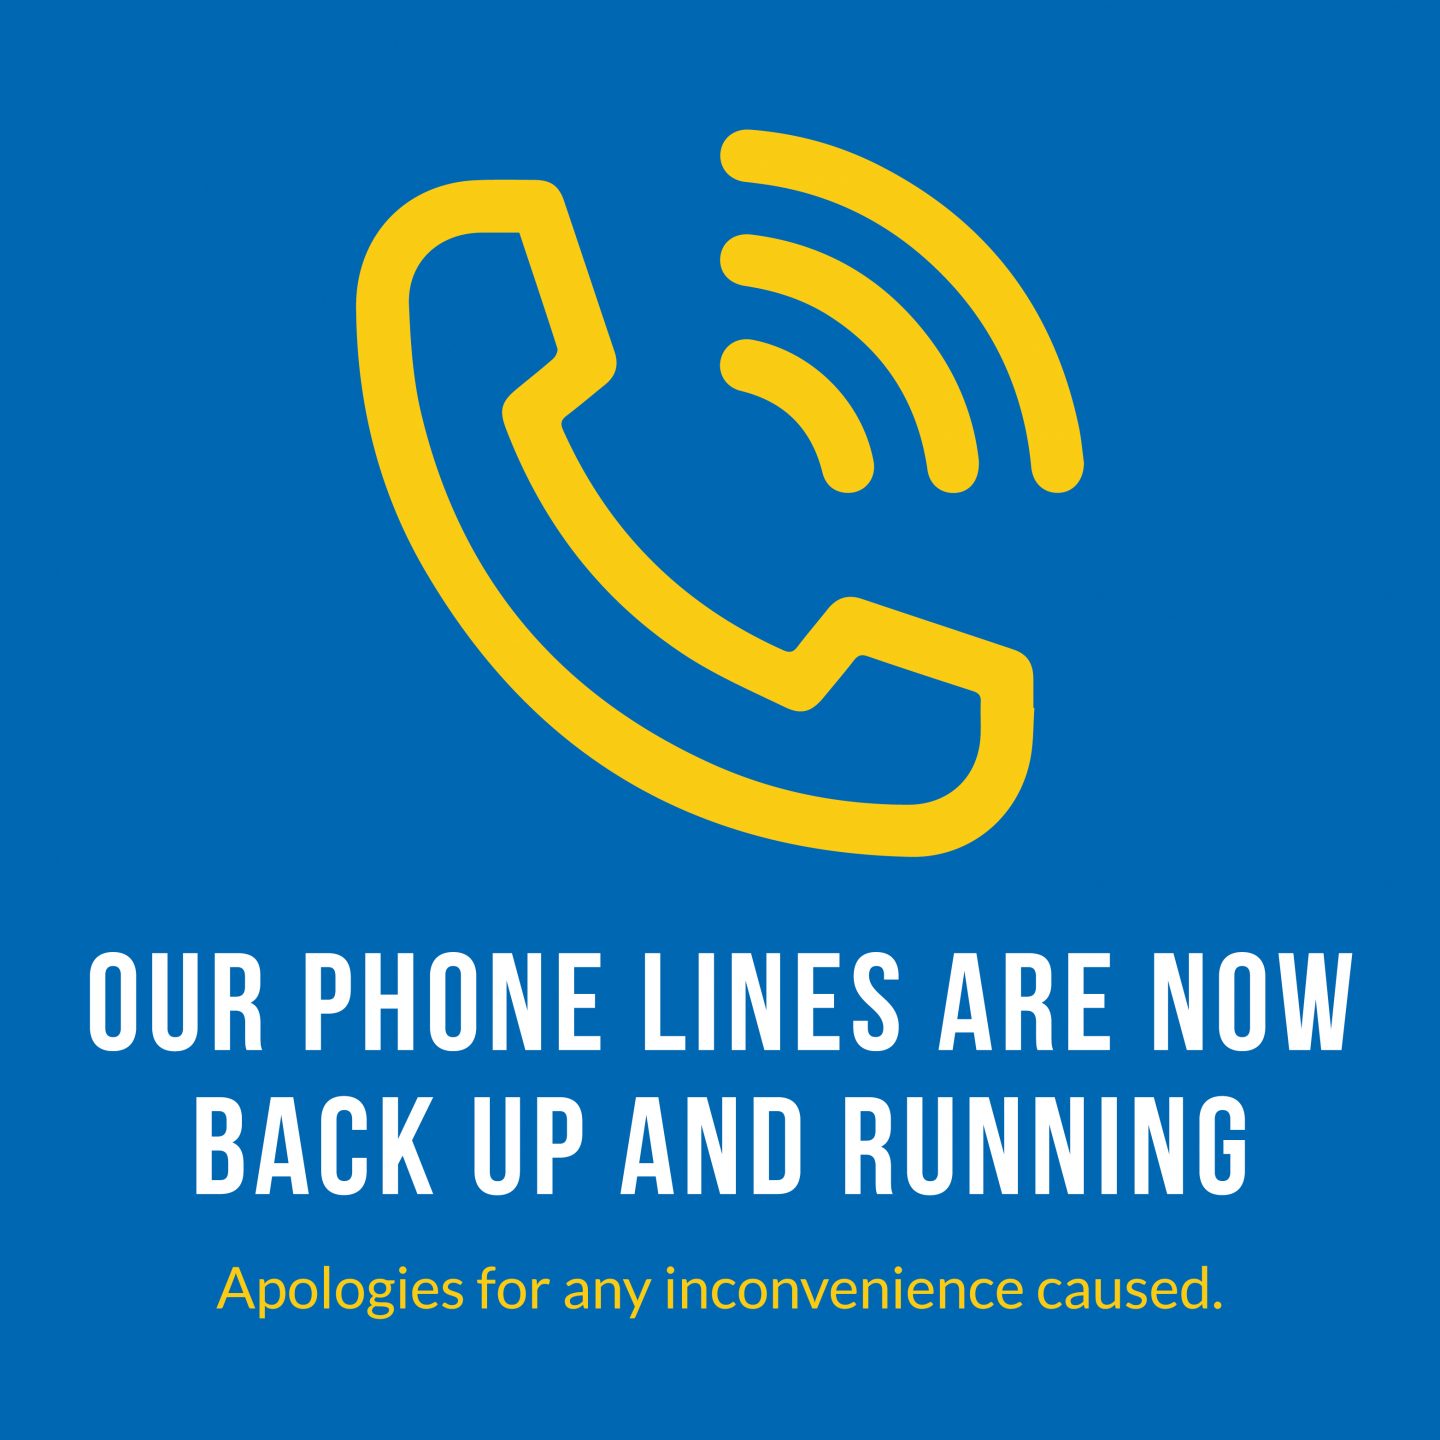 Phone lines back up